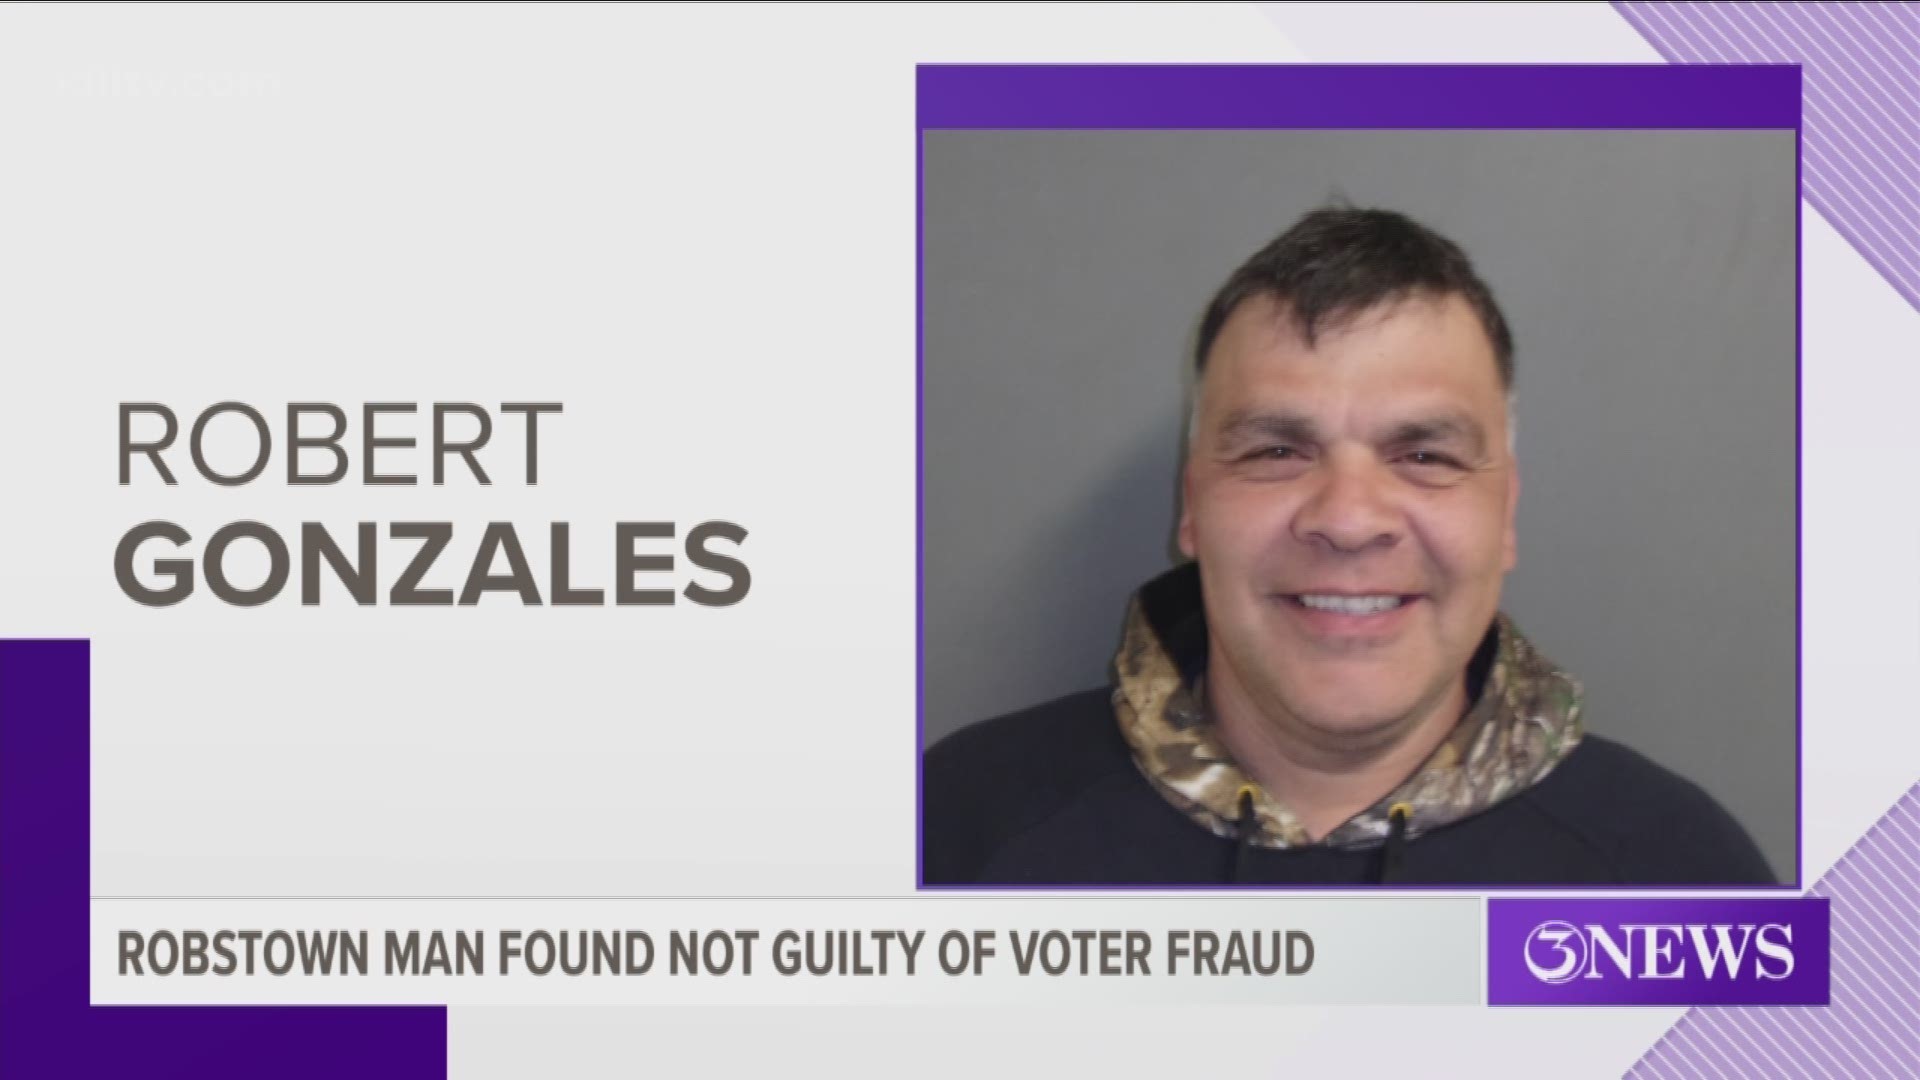 Robert Gonzalez was found not guilty observing the secret ballot of another voter and then unlawfully divulging that person's vote.